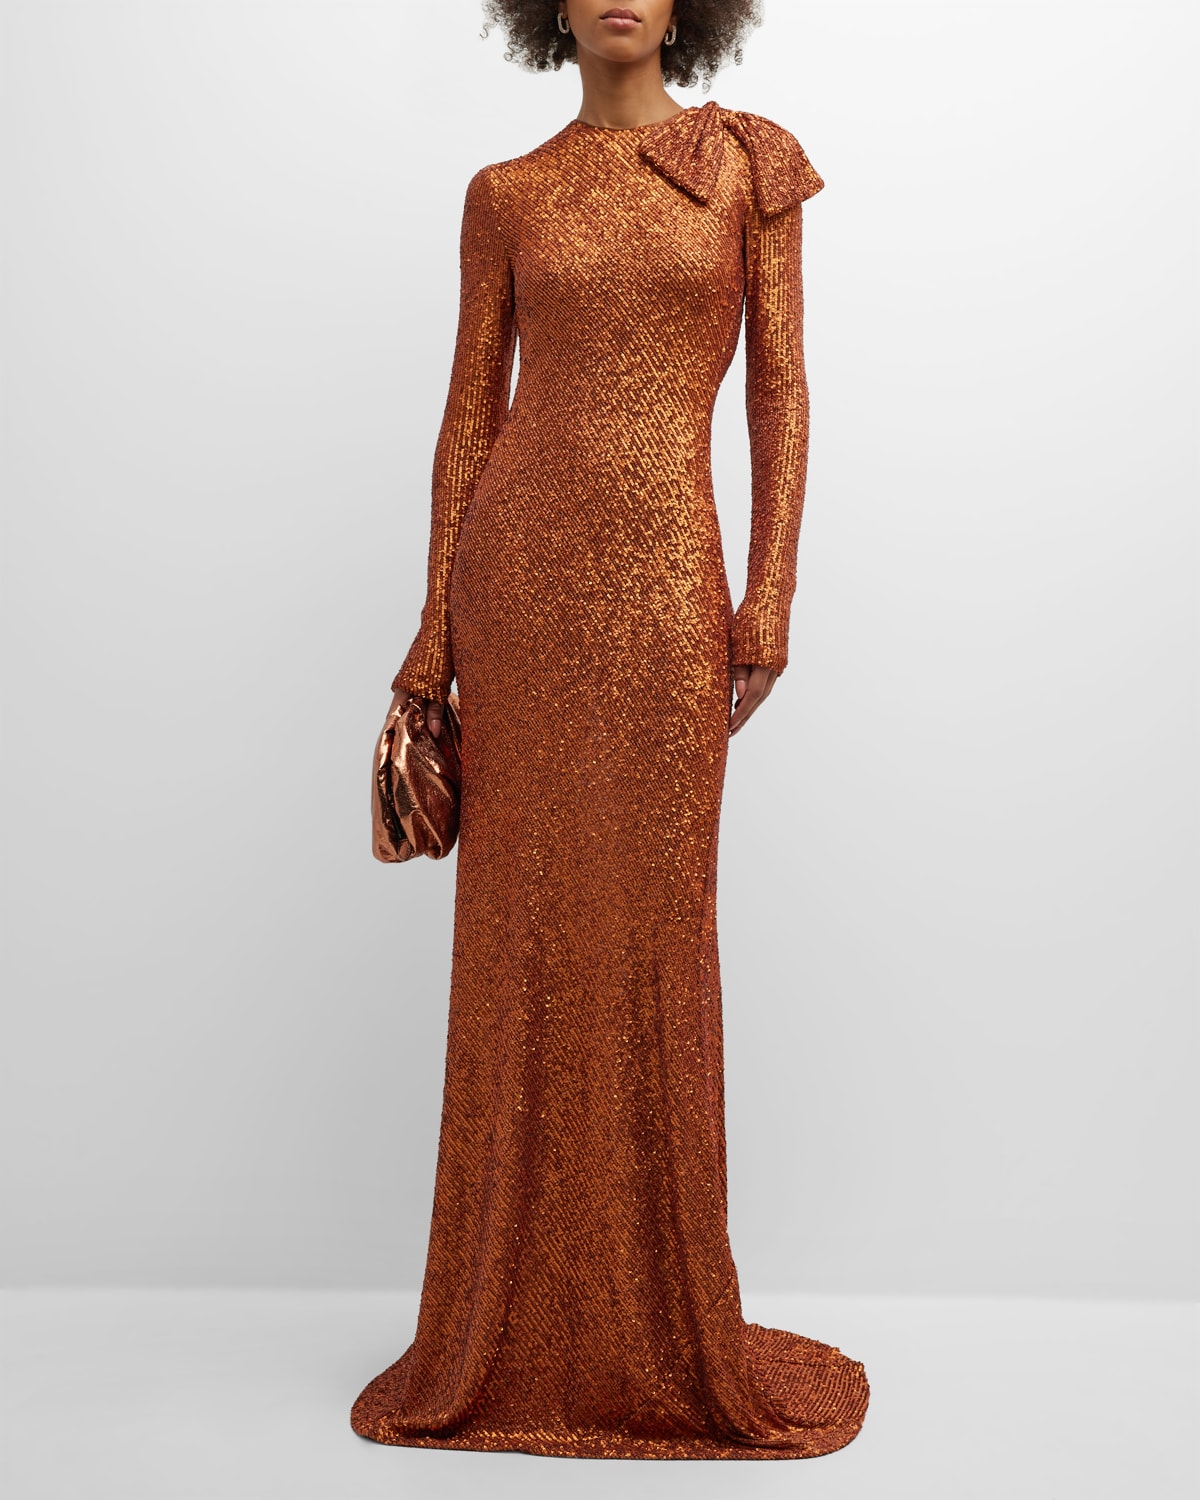 NAEEM KHAN LONG-SLEEVE SEQUIN GOWN WITH BOW DETAIL